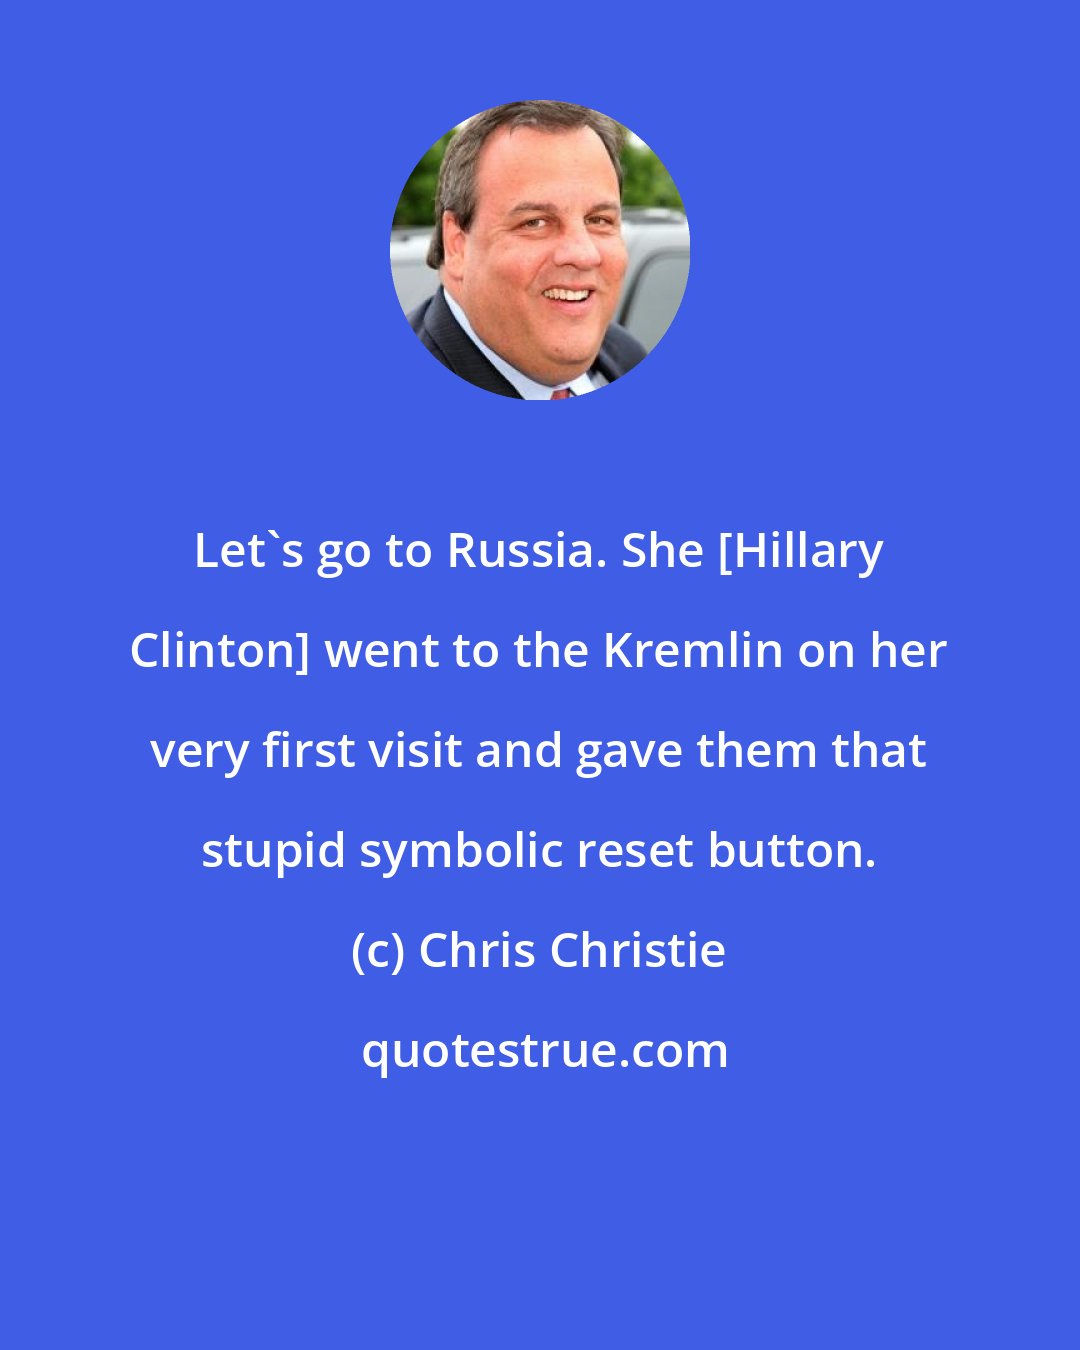 Chris Christie: Let's go to Russia. She [Hillary Clinton] went to the Kremlin on her very first visit and gave them that stupid symbolic reset button.